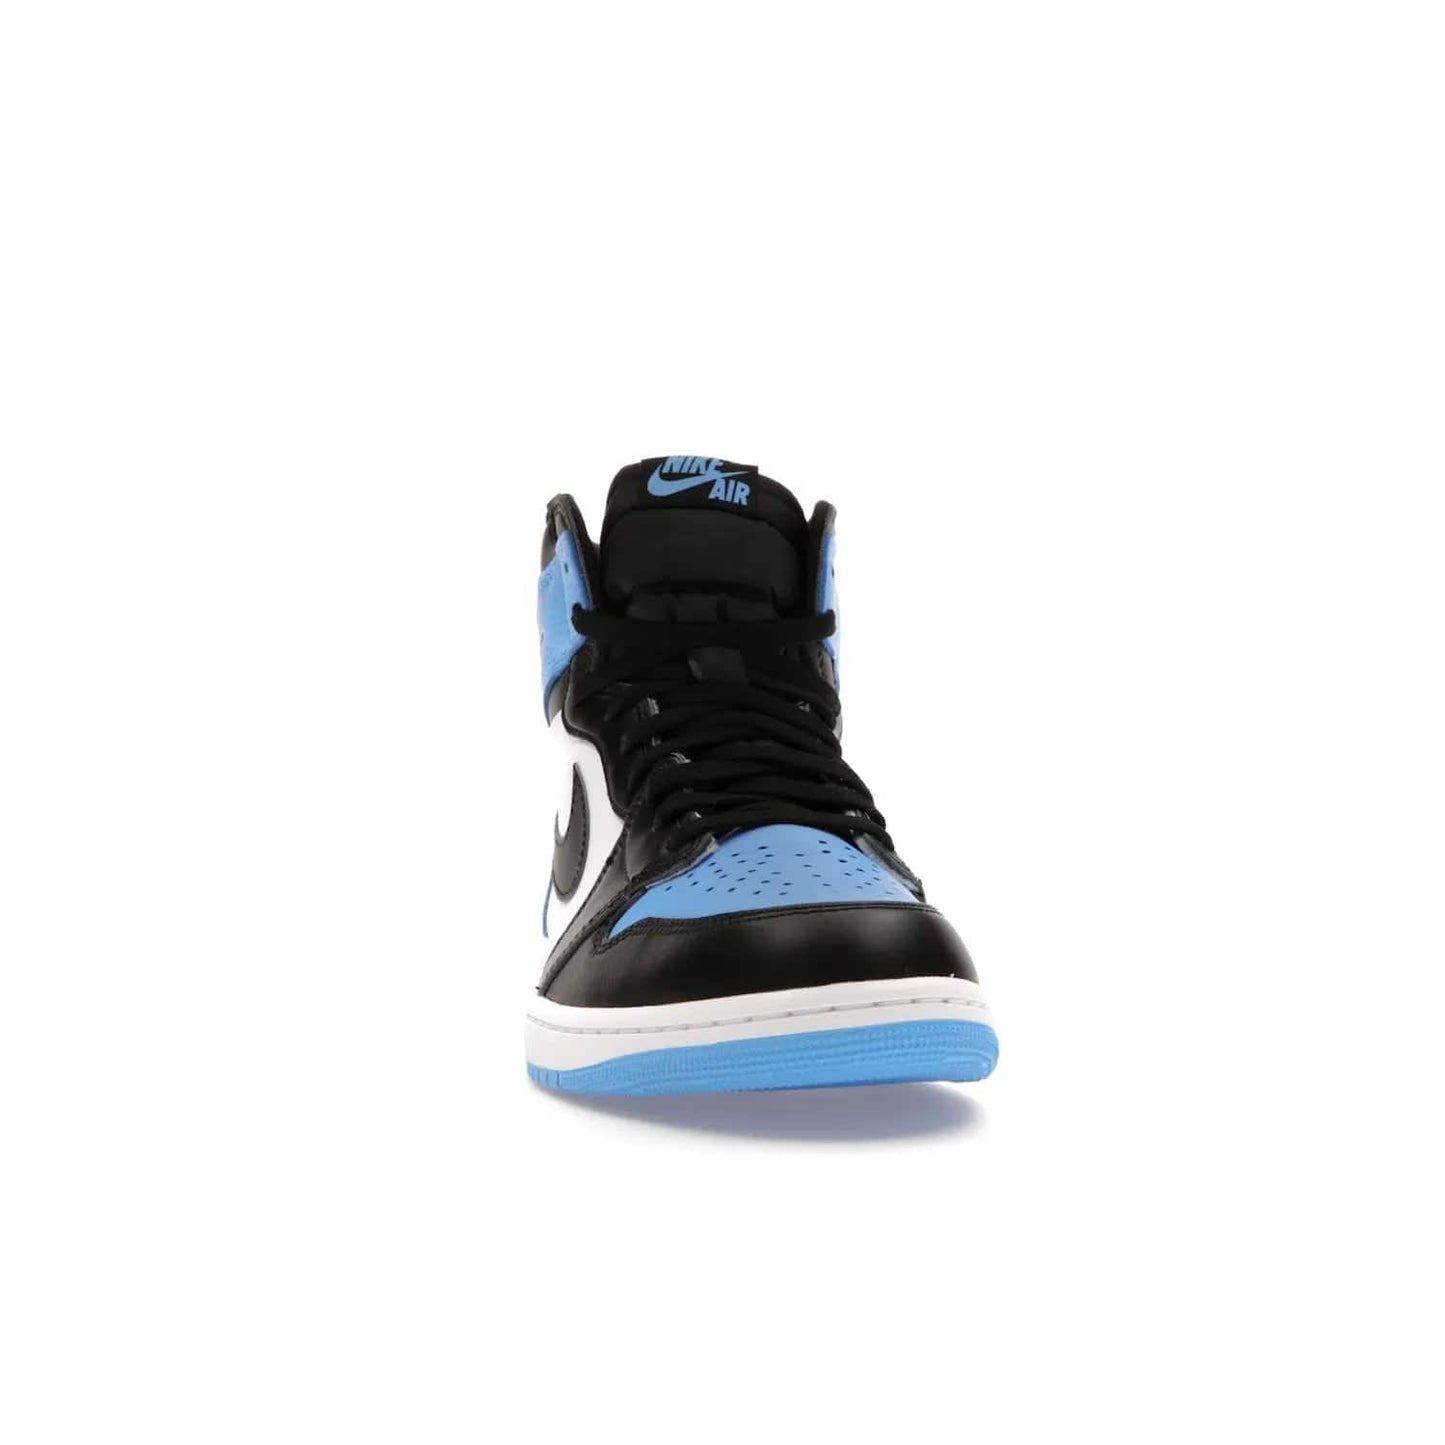 Jordan 1 Retro High OG UNC Toe - Image 9 - Only at www.BallersClubKickz.com - Jordan 1 High OG UNC Toe is a fashionable, high-quality sneaker featuring University Blue, Black White and White. Releasing July 22, 2023, it's the perfect pick up for sneakerheads.